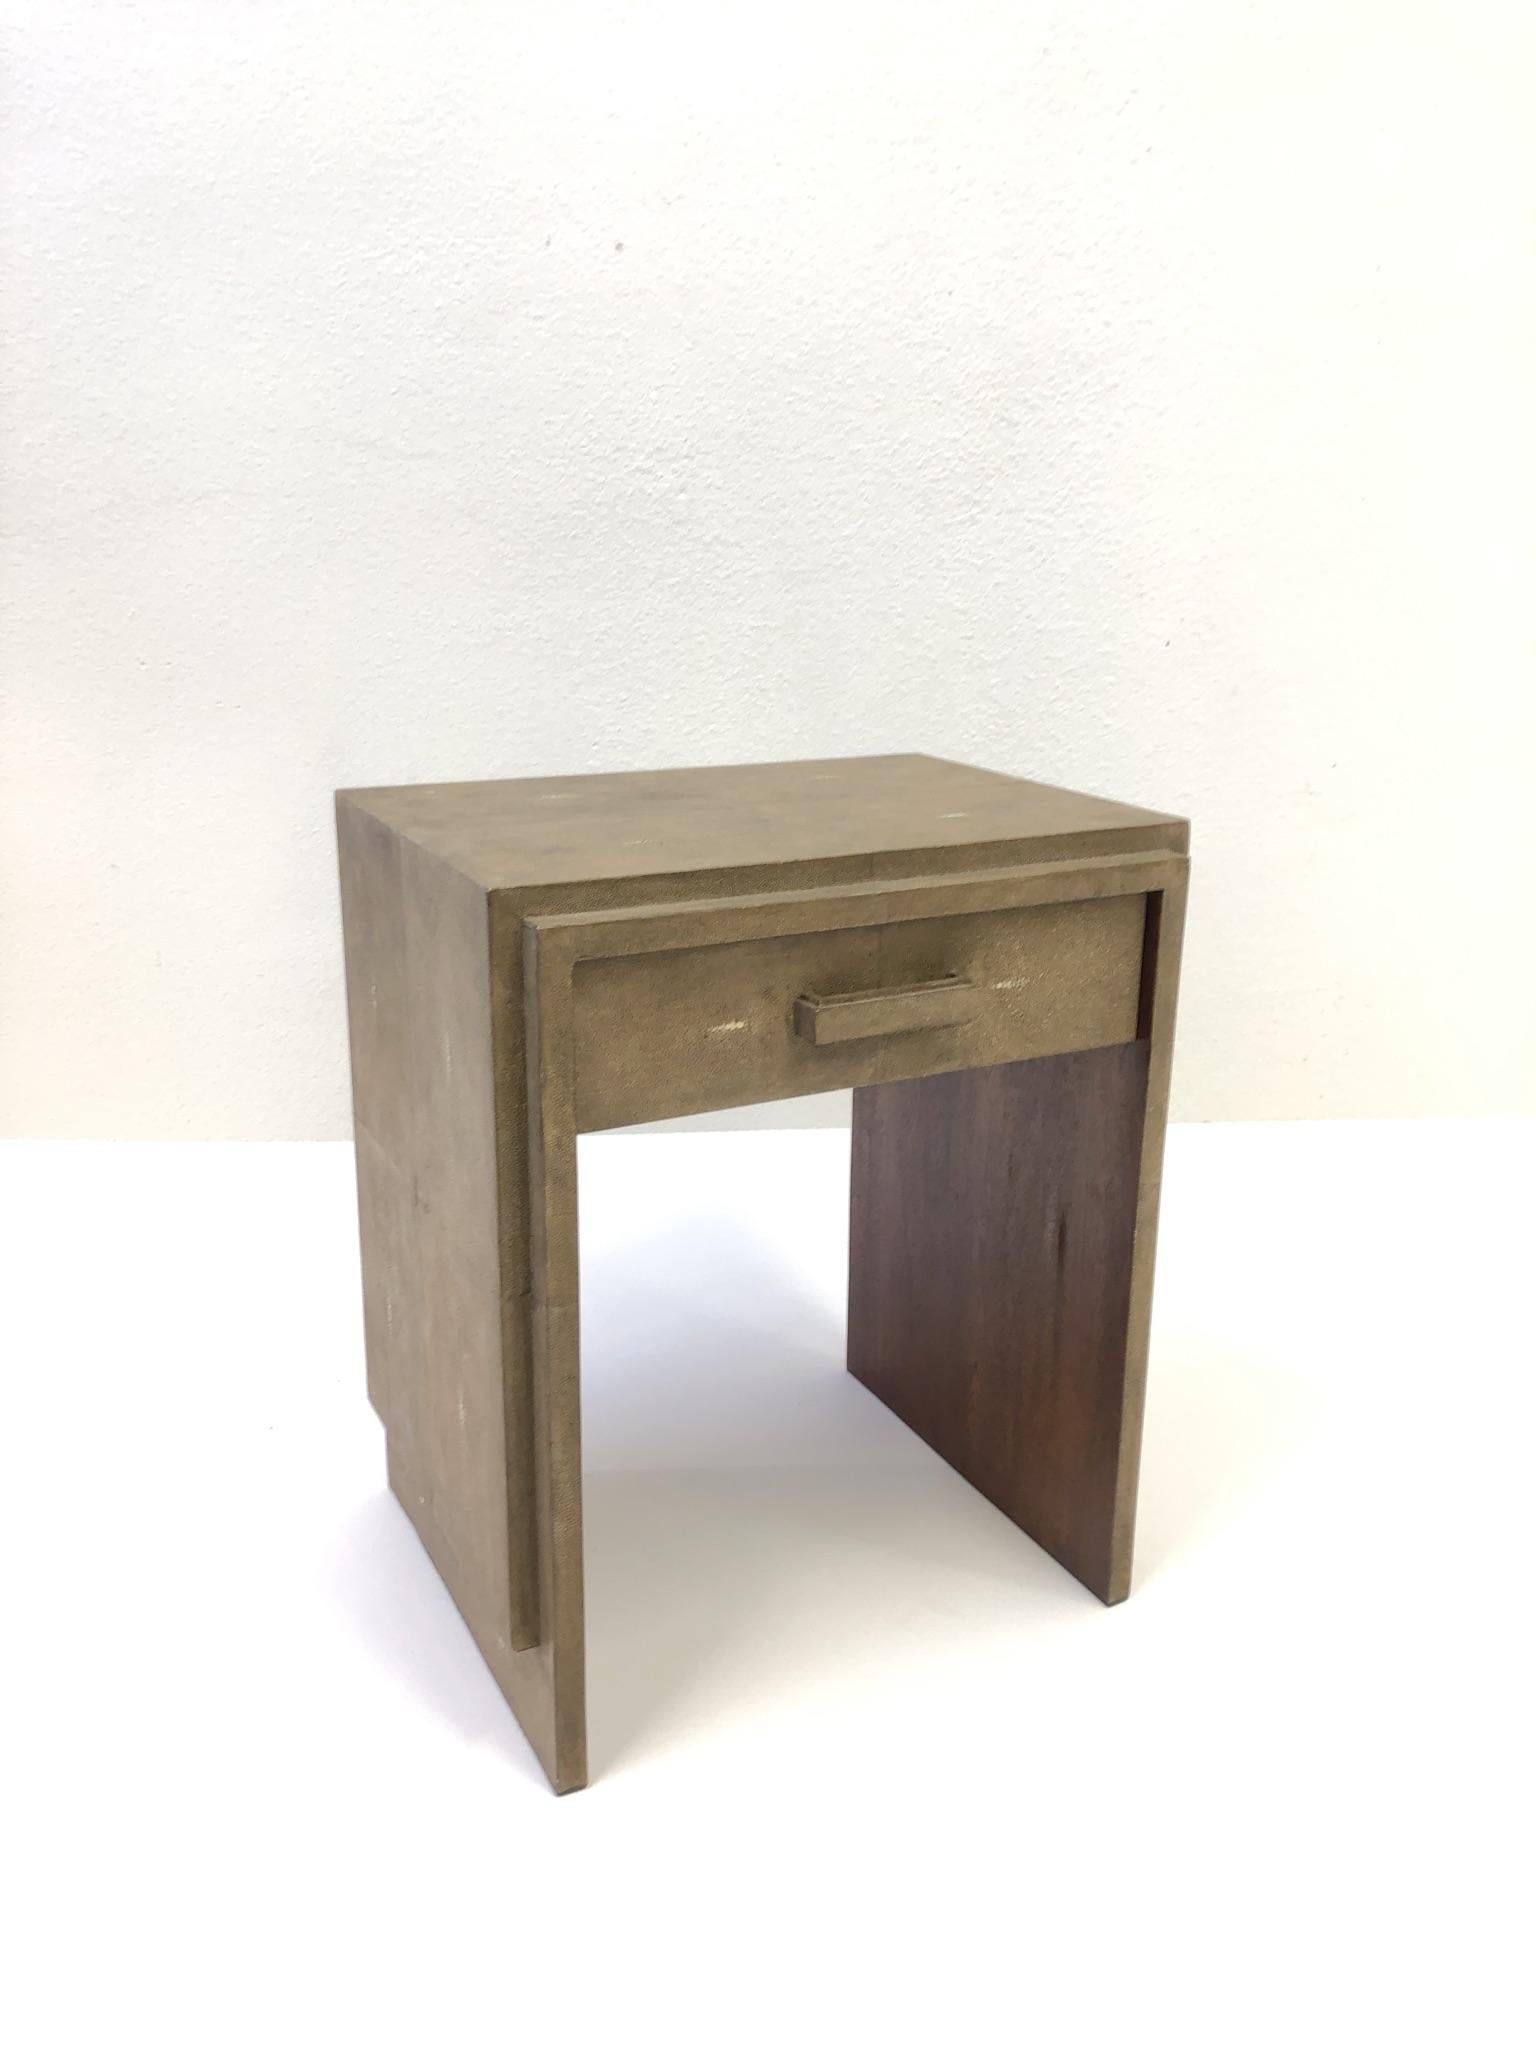 A glamorous, 1990s French shagreen and mahogany veneer side table design by Ria and Yiouri Augousti. The table has a drawer. 
Dimensions: 23.75” high 19.75” wide 15.75” deep.